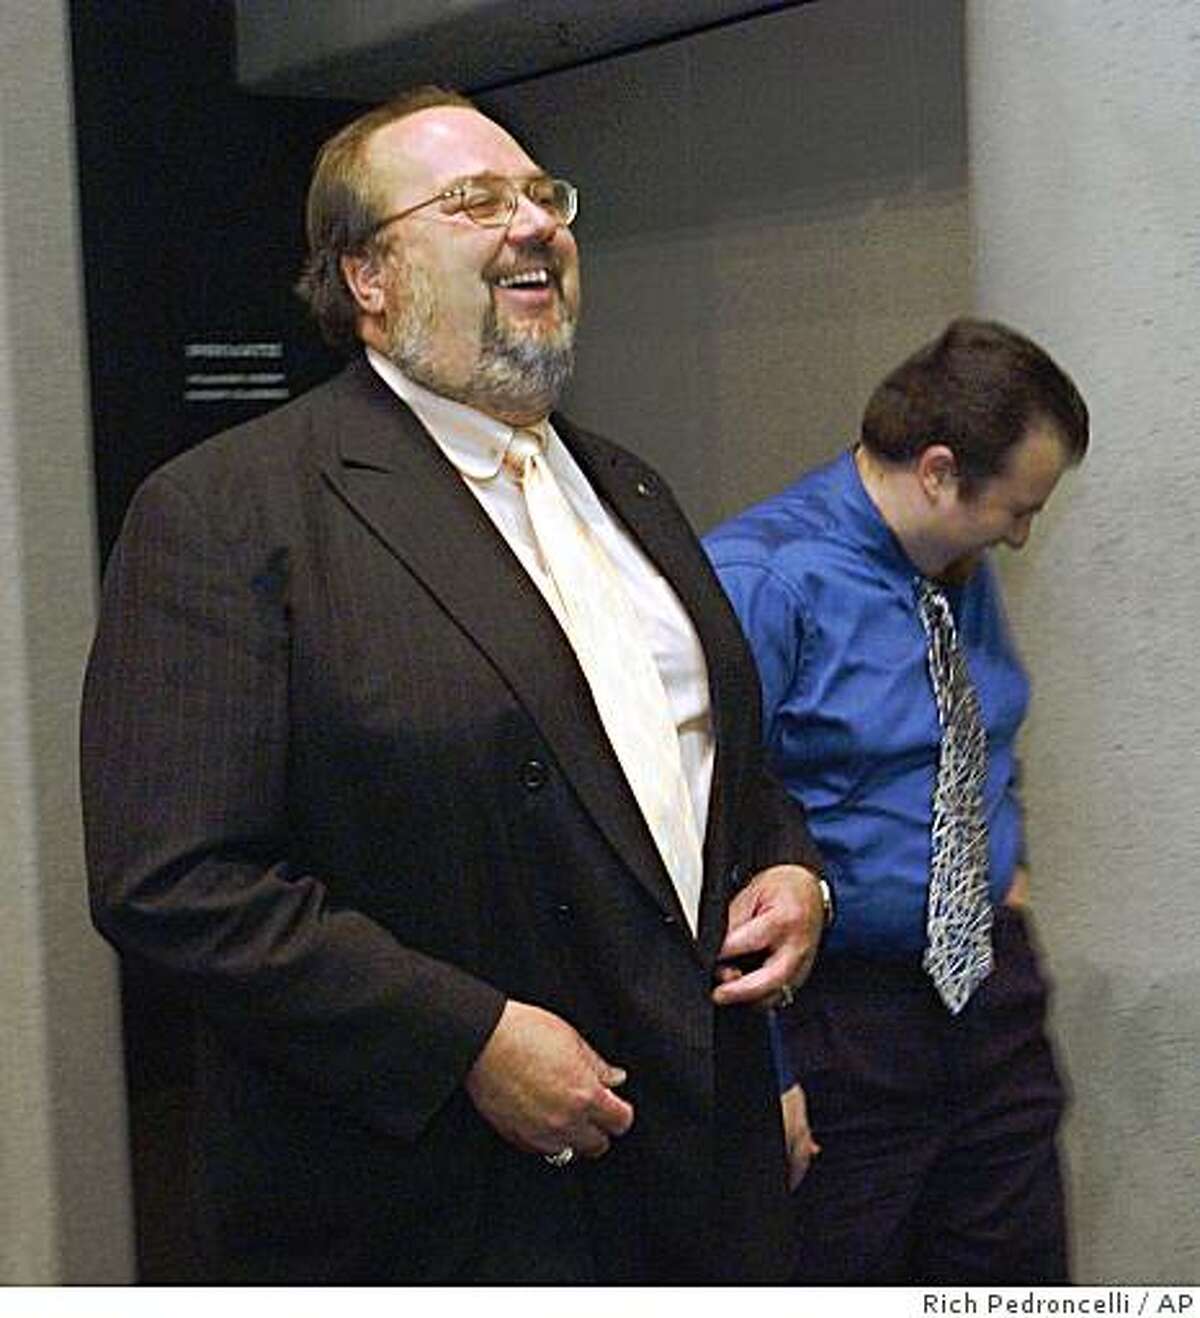 Rob Feckner, left, who was just elected California Employees Retirement System board president, laughs at a comment made by his son, Carl Baughman, right, as they leave the CalPERS board meeting in Sacramento, Calif., Wednesday Feb. 16, 2005. By a 12-0 vote Feckner, 47, a 27-year school employee and statewide union official, replaces Sean Harrigan, who was ousted in December (AP Photo/Rich Pedroncelli)